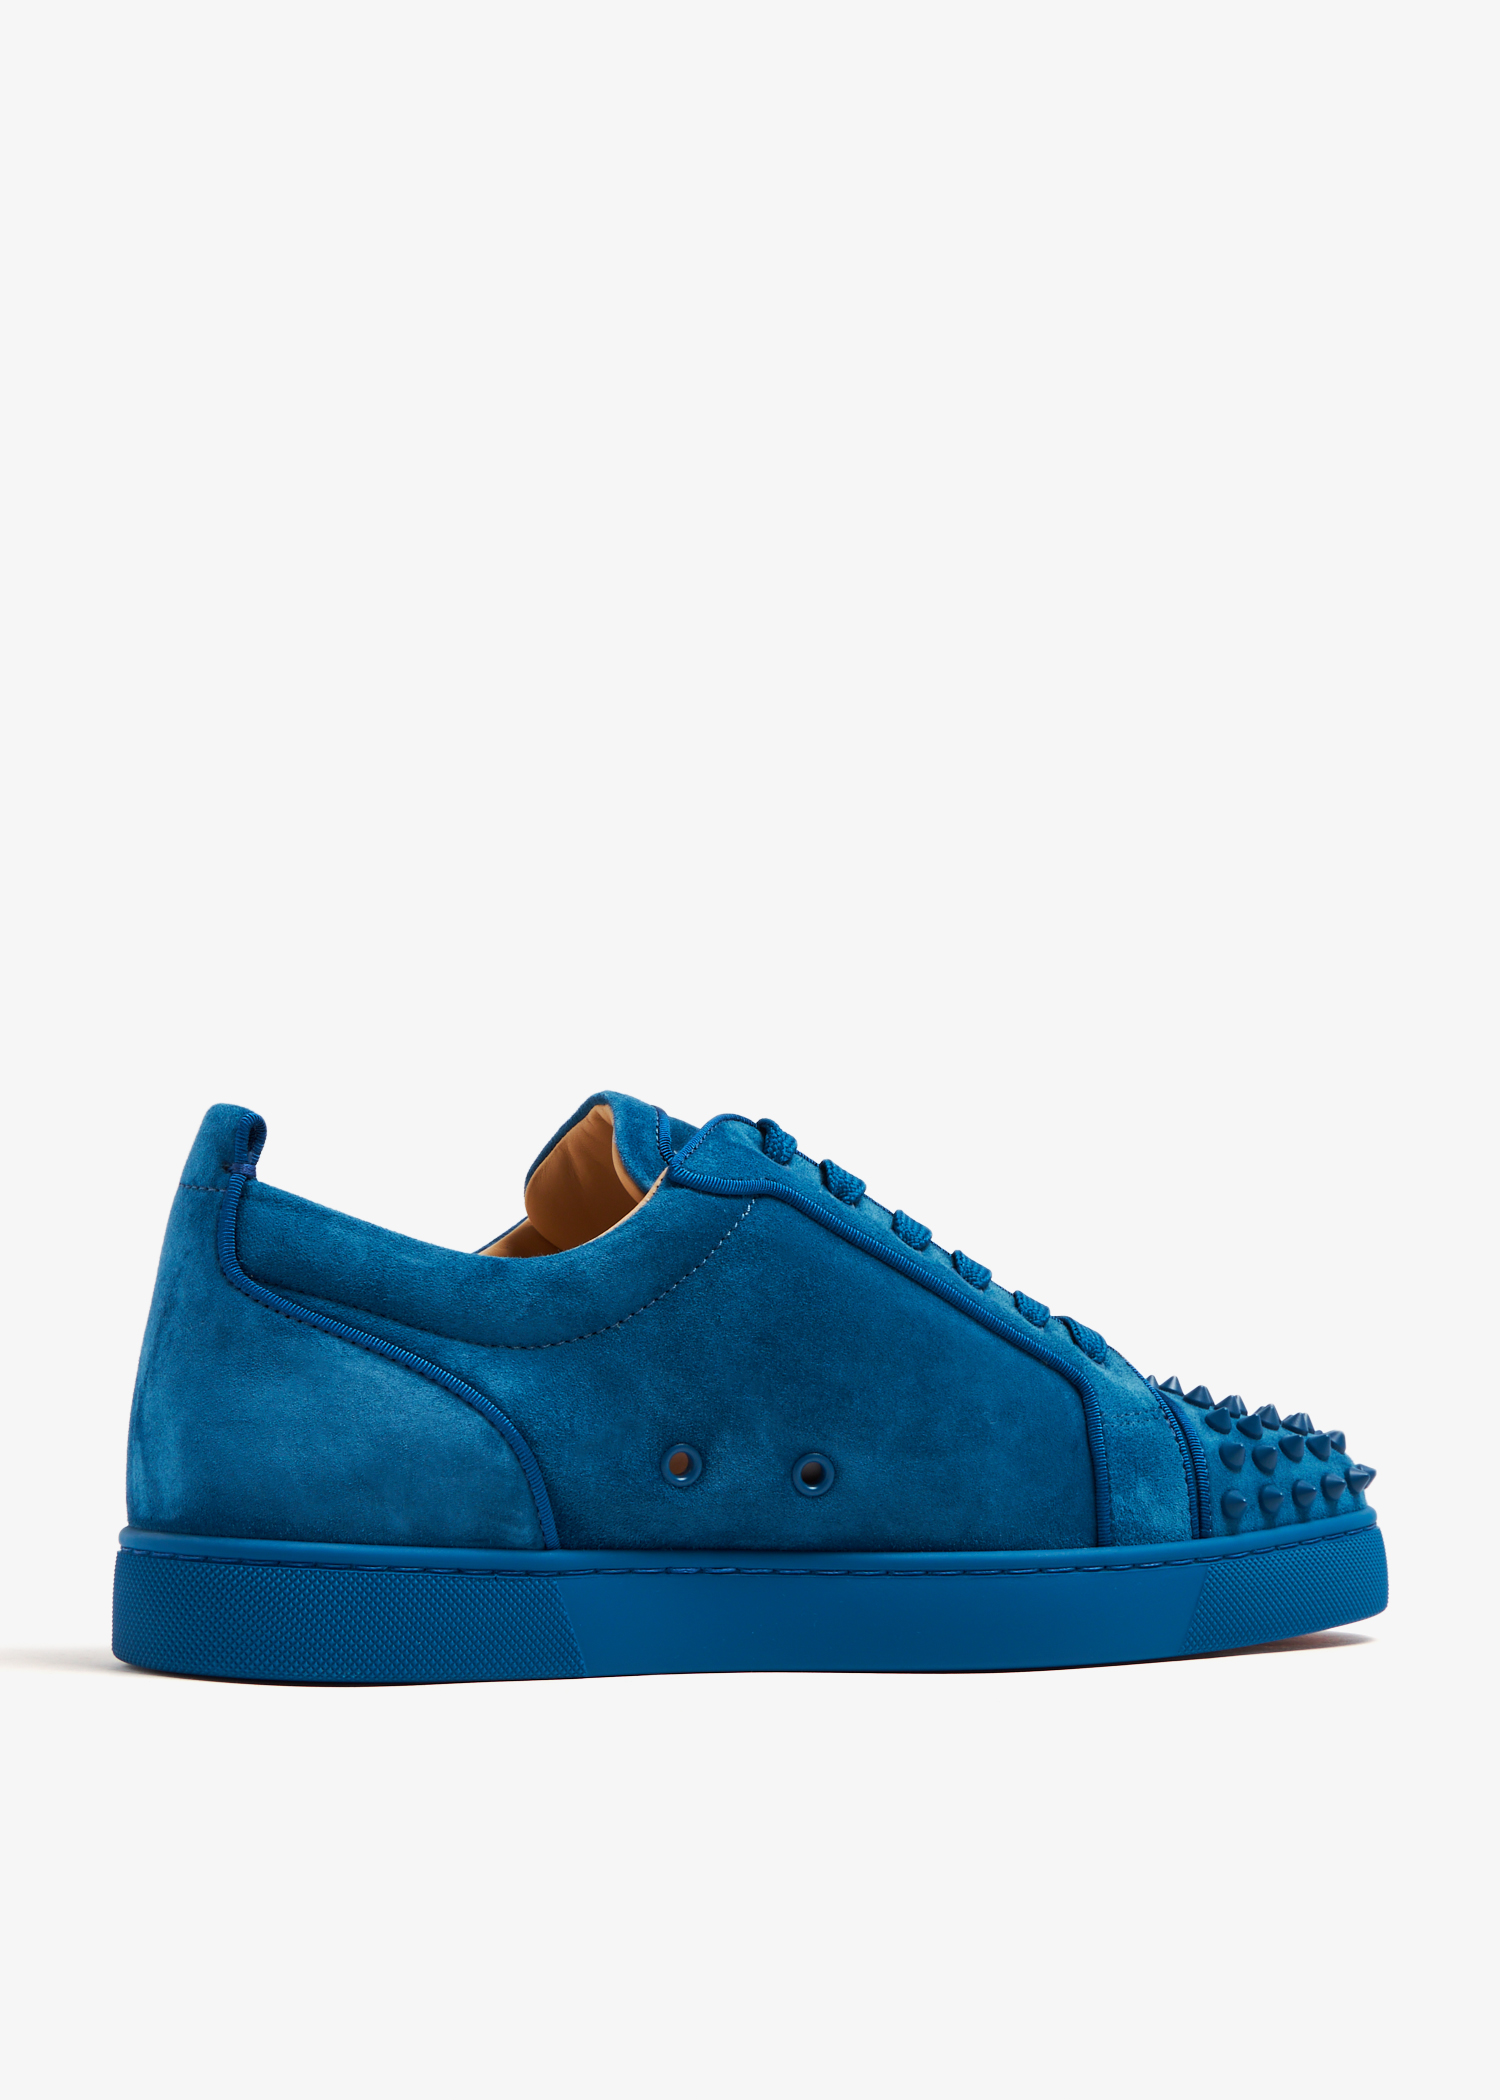 Christian Louboutin Louis Junior Spikes sneakers for Men - Blue in 